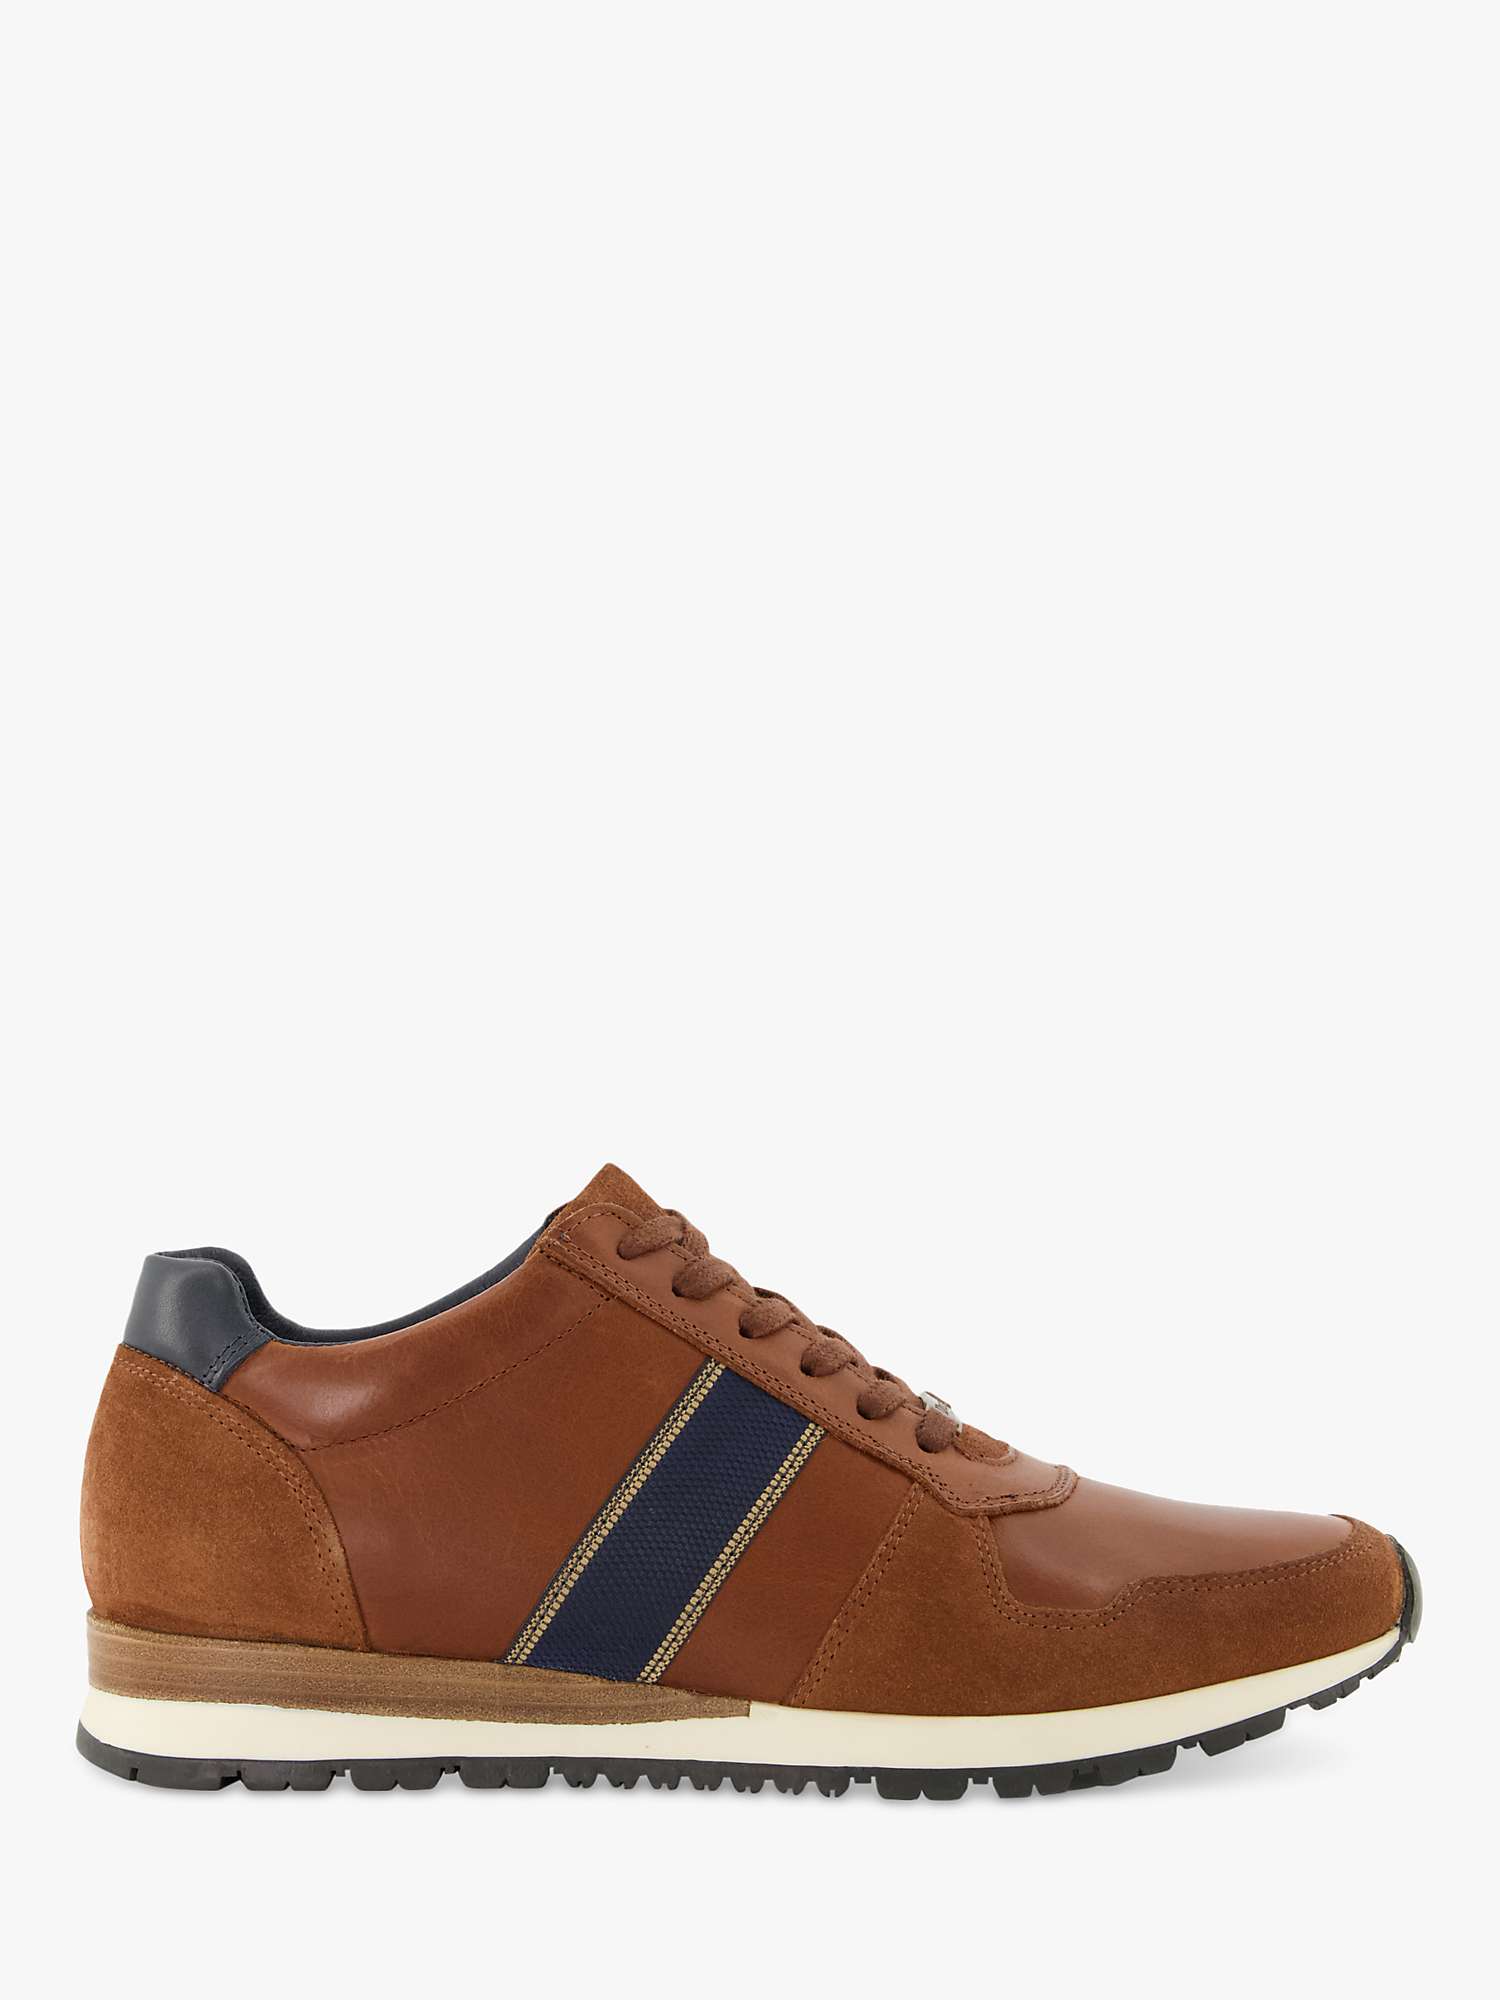 Buy Dune Treck Leather Stripe Webbing Lace Up Trainers Online at johnlewis.com